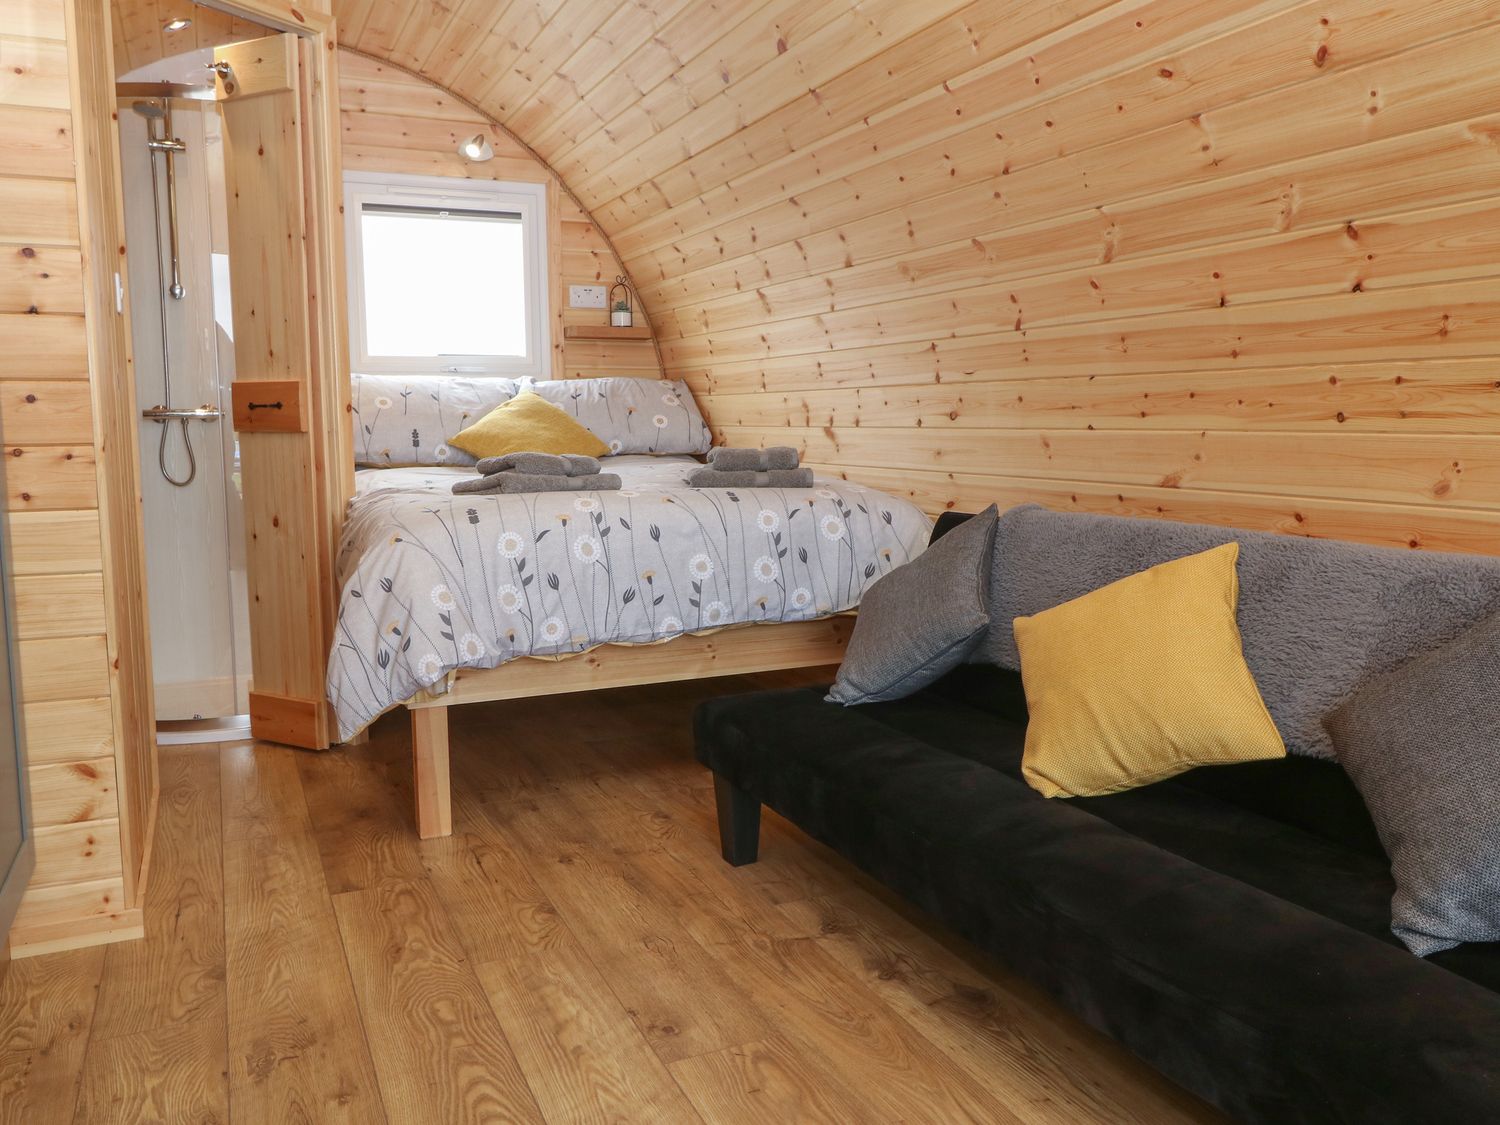 Parys Pod by Amlwch, Anglesey. Studio-style open-plan living, sofa bed, patio, hot tub, rural views.